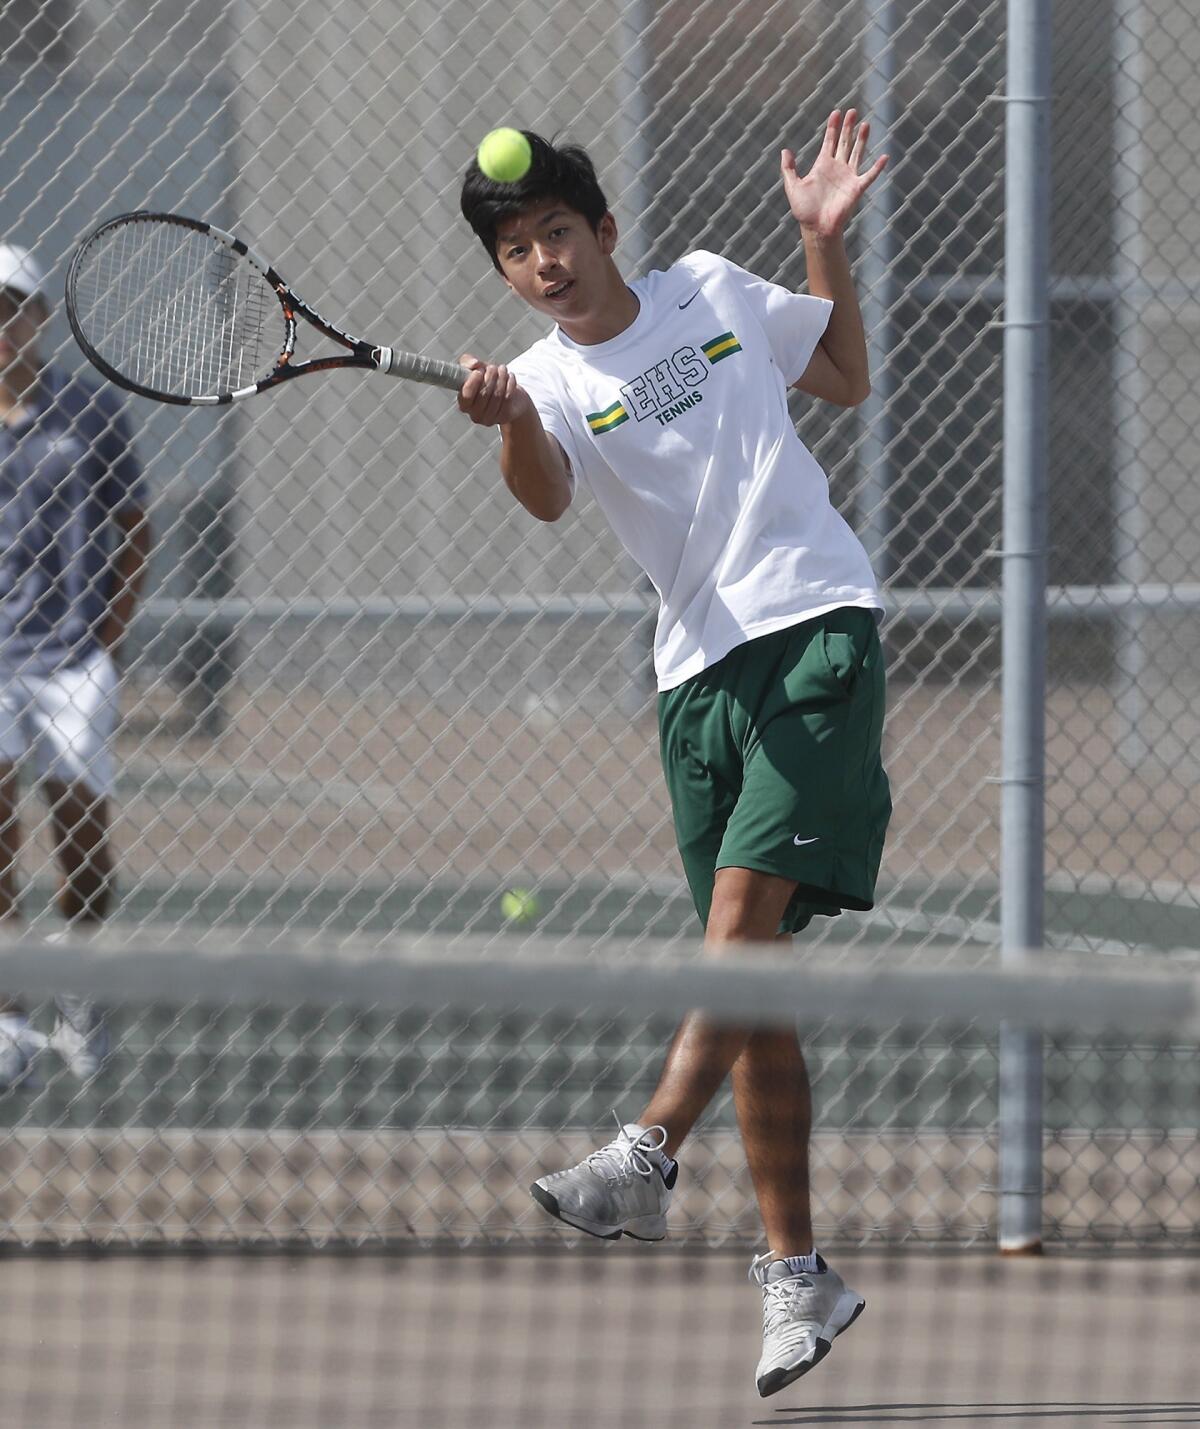 Edison High No. 1 doubles player Ryan Lum hits against Walnut in the quarterfinals of the CIF Southern Section Division 2 playoffs at home on Monday.